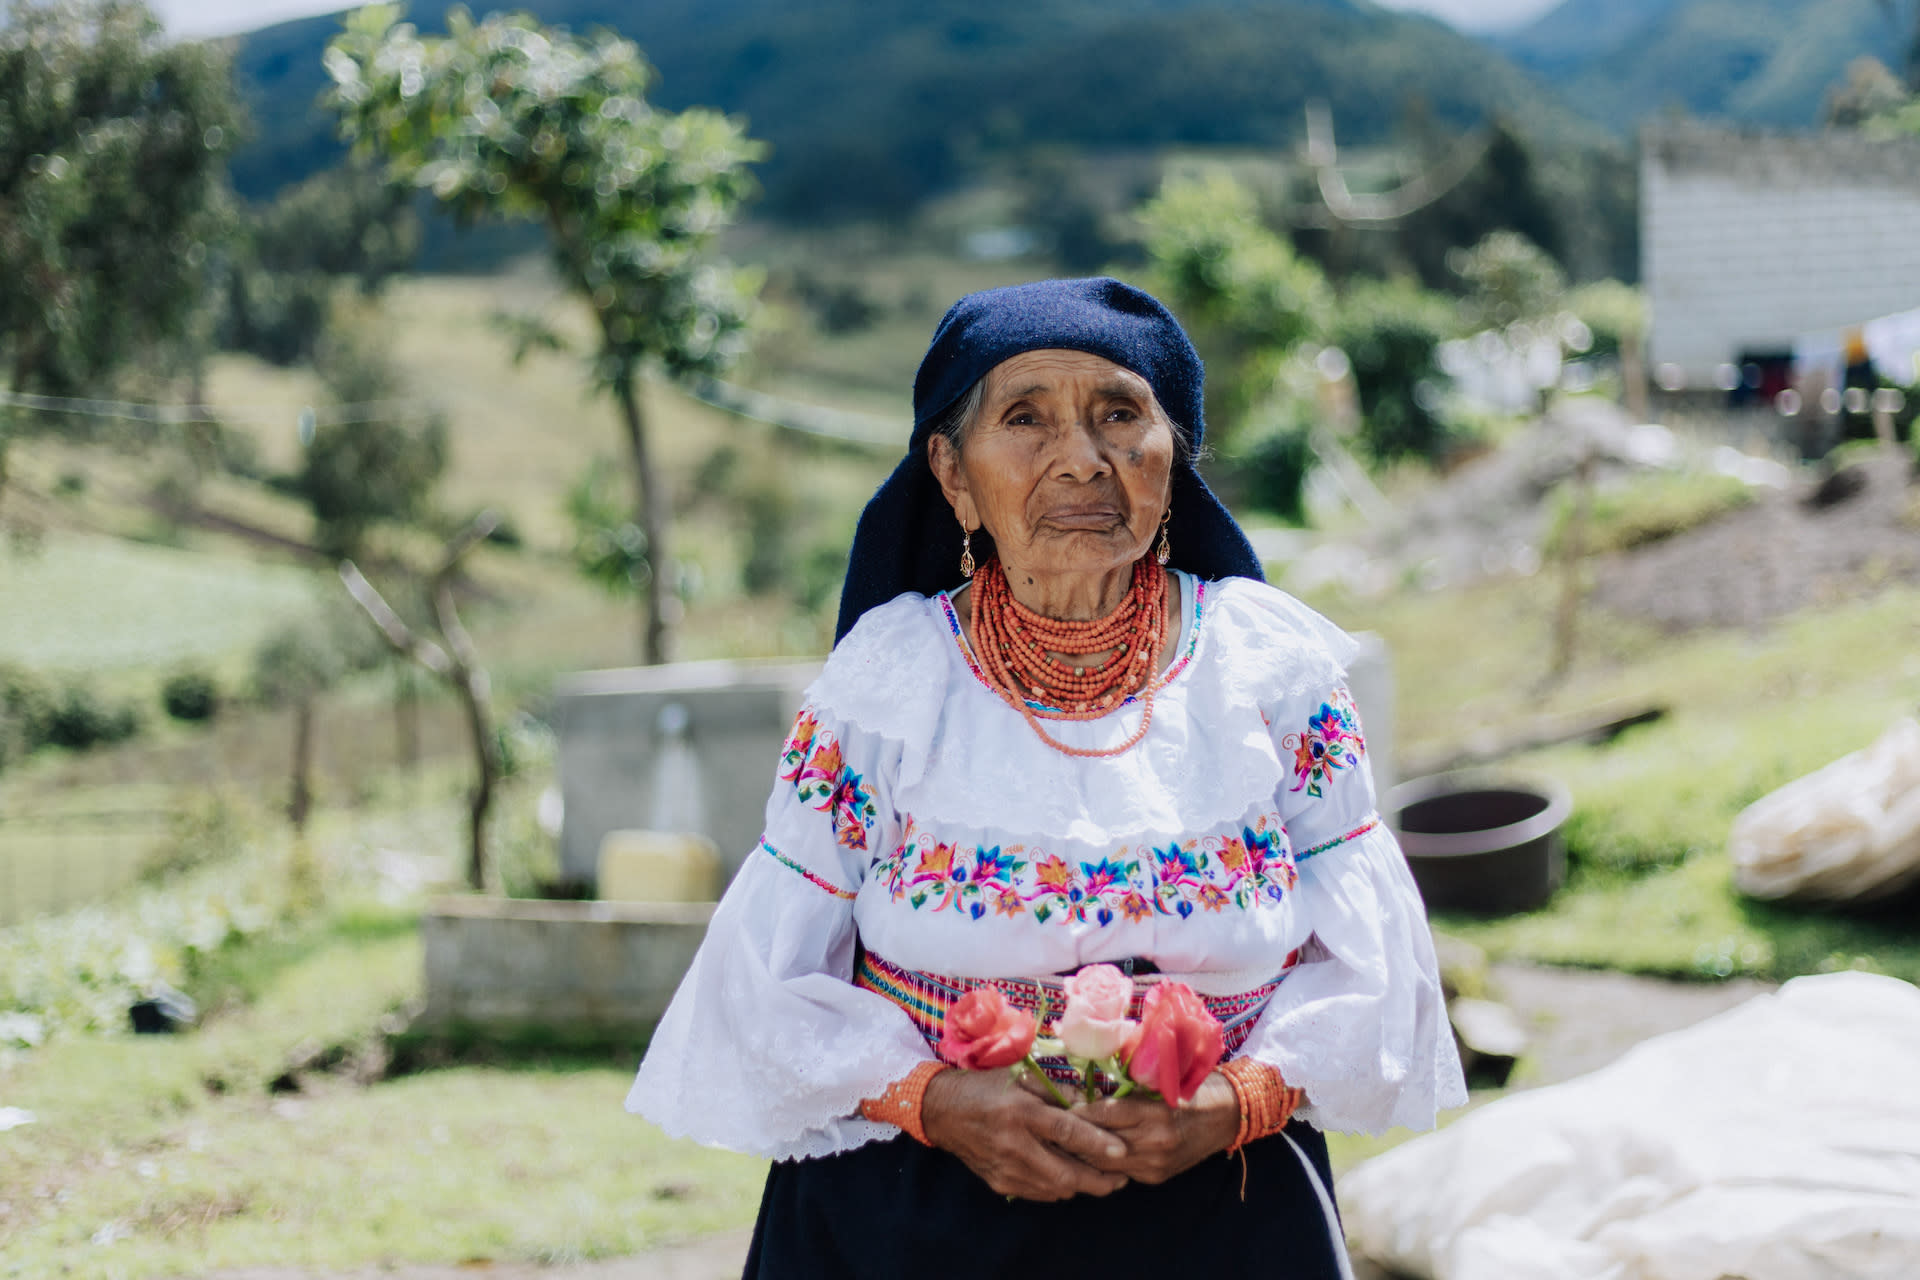 A 91-year-old Ecuadorian woman sits wearing traditional clothing and holding flowers in her hand. Behind her is a field of green grass and trees.